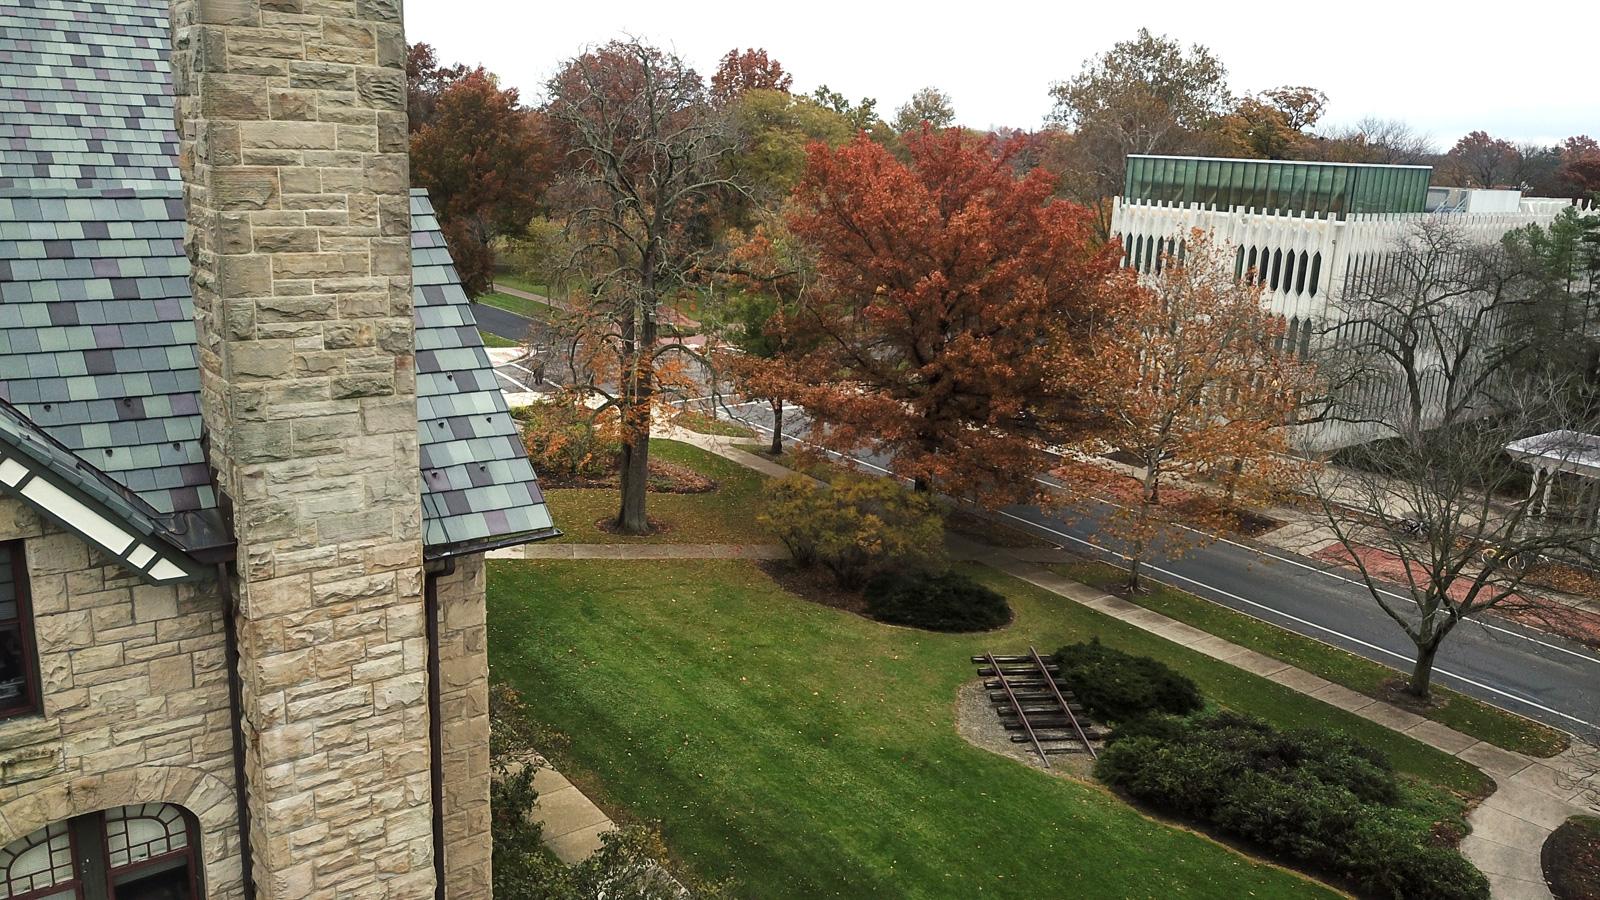 Aerial view of campus buildings and fall foliage.